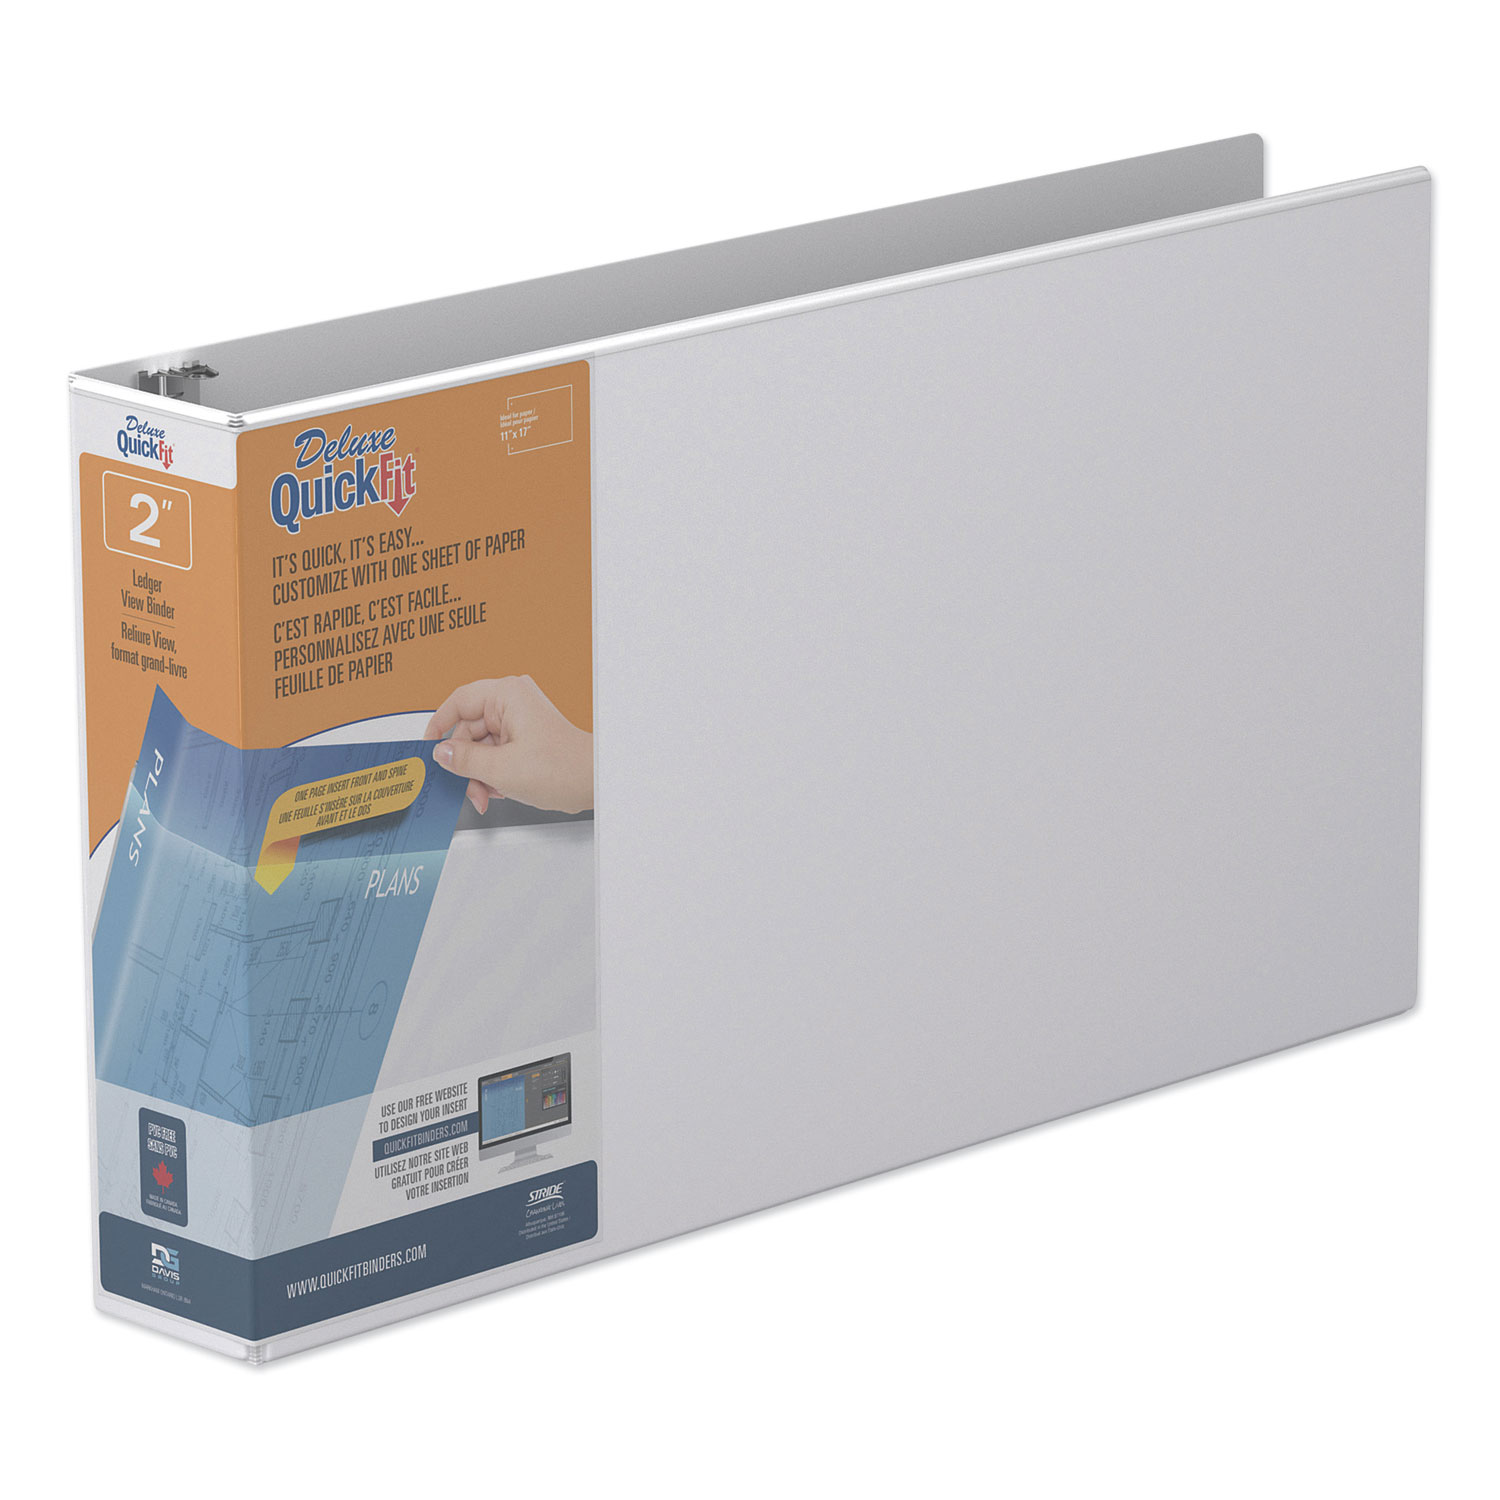  Stride 94030 QuickFit Ledger D-Ring View Binder, 3 Rings, 2 Capacity, 11 x 17, White (STW94030) 